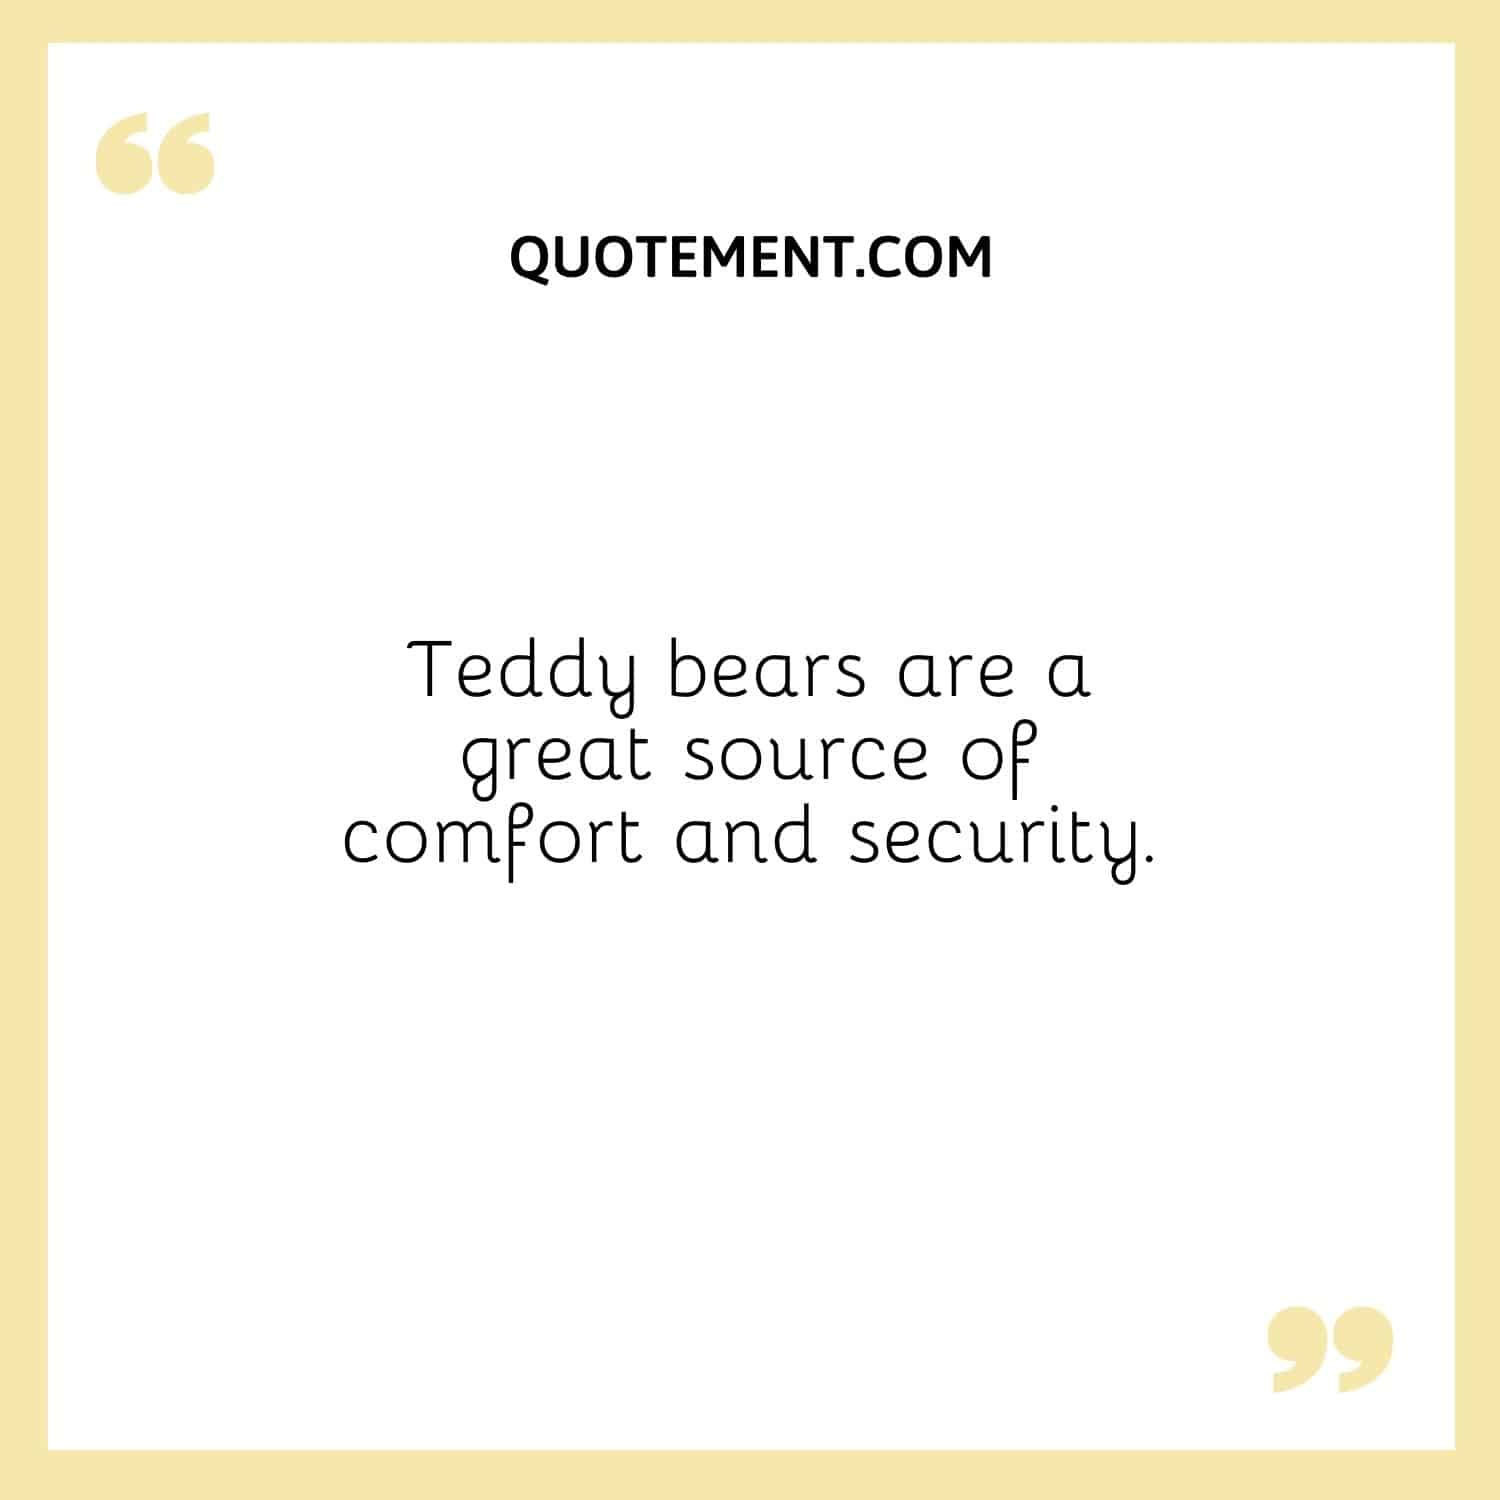 Teddy bears are a great source of comfort and security